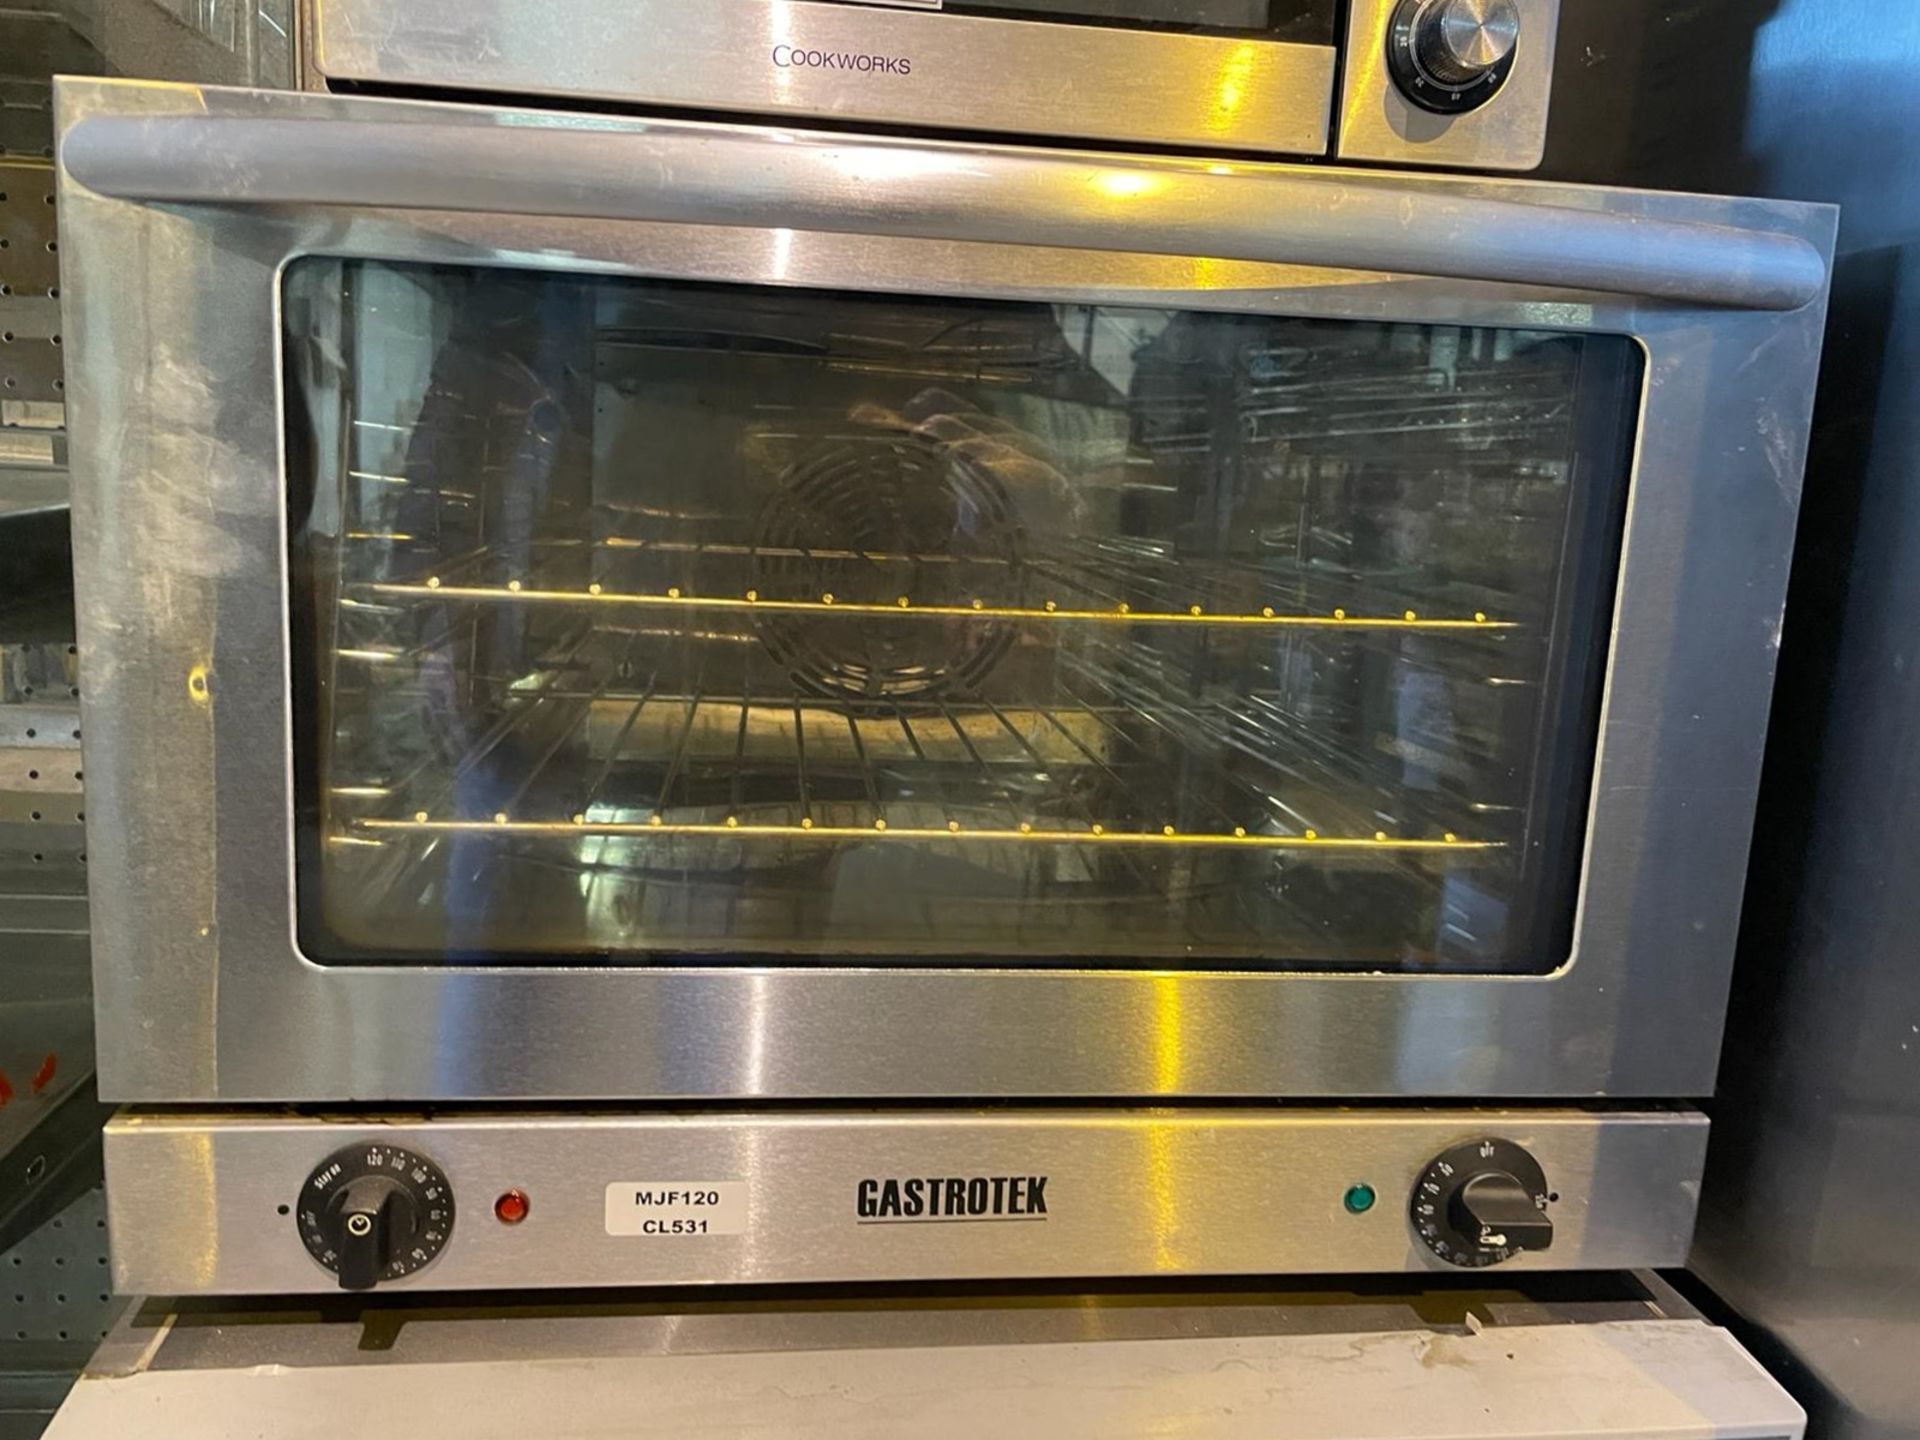 1 x Gastrotek Countertop Commercial Oven With a Stainless Steel Finish - Image 4 of 5